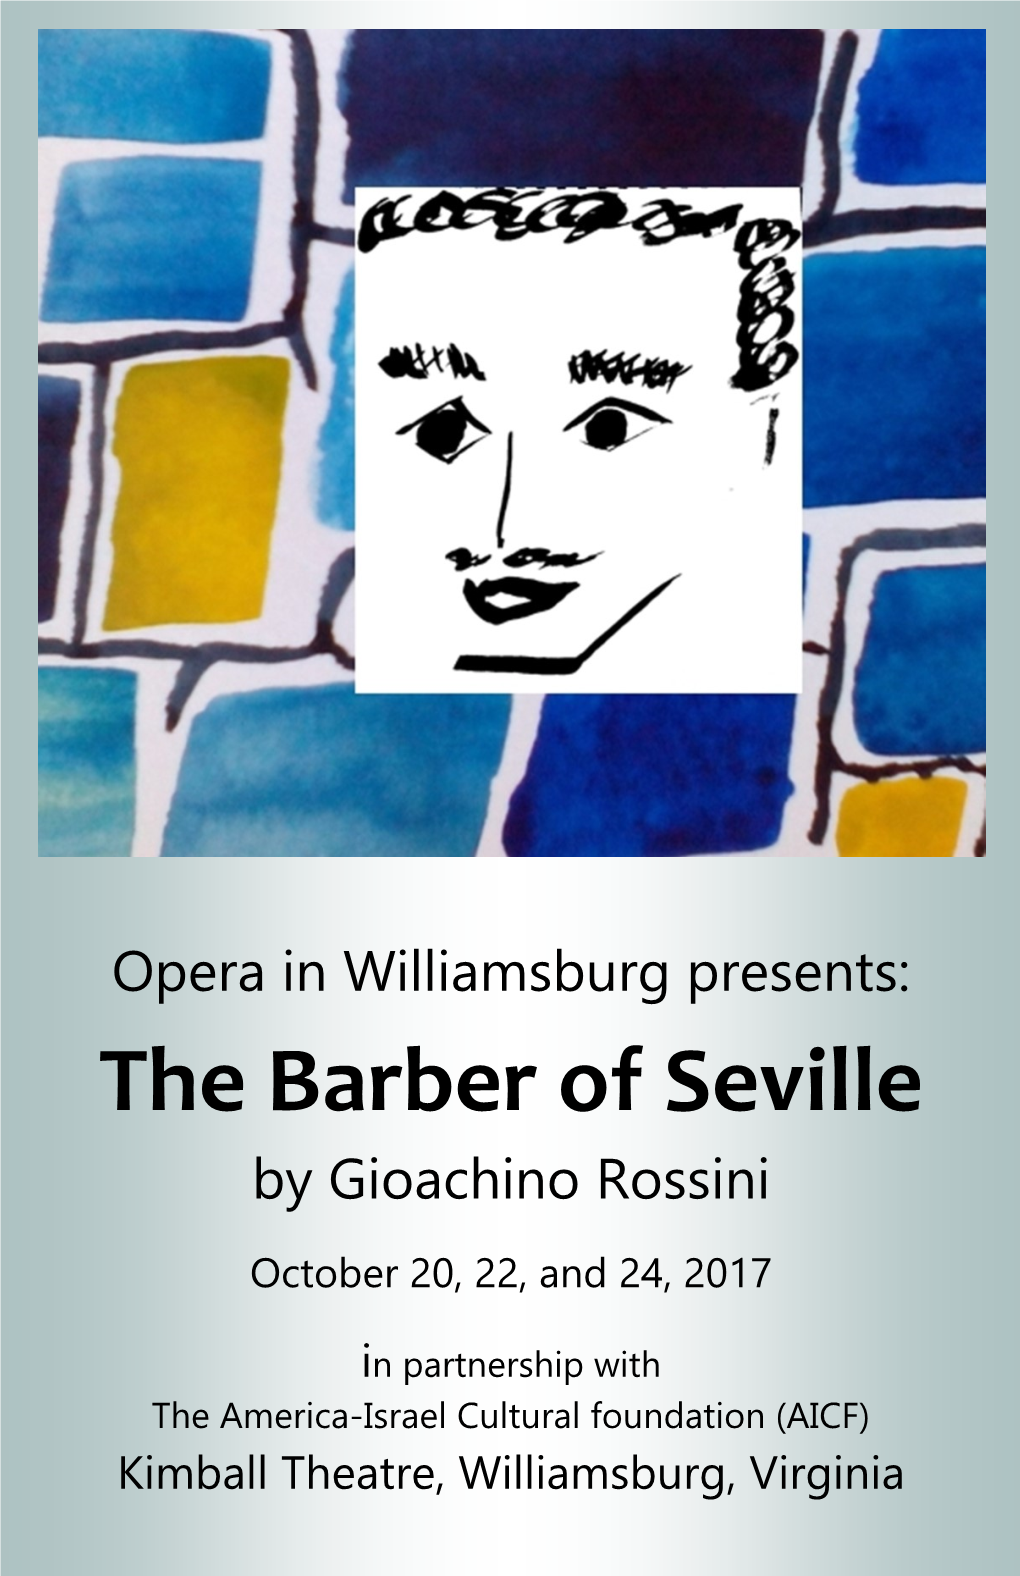 The Barber of Seville by Gioachino Rossini